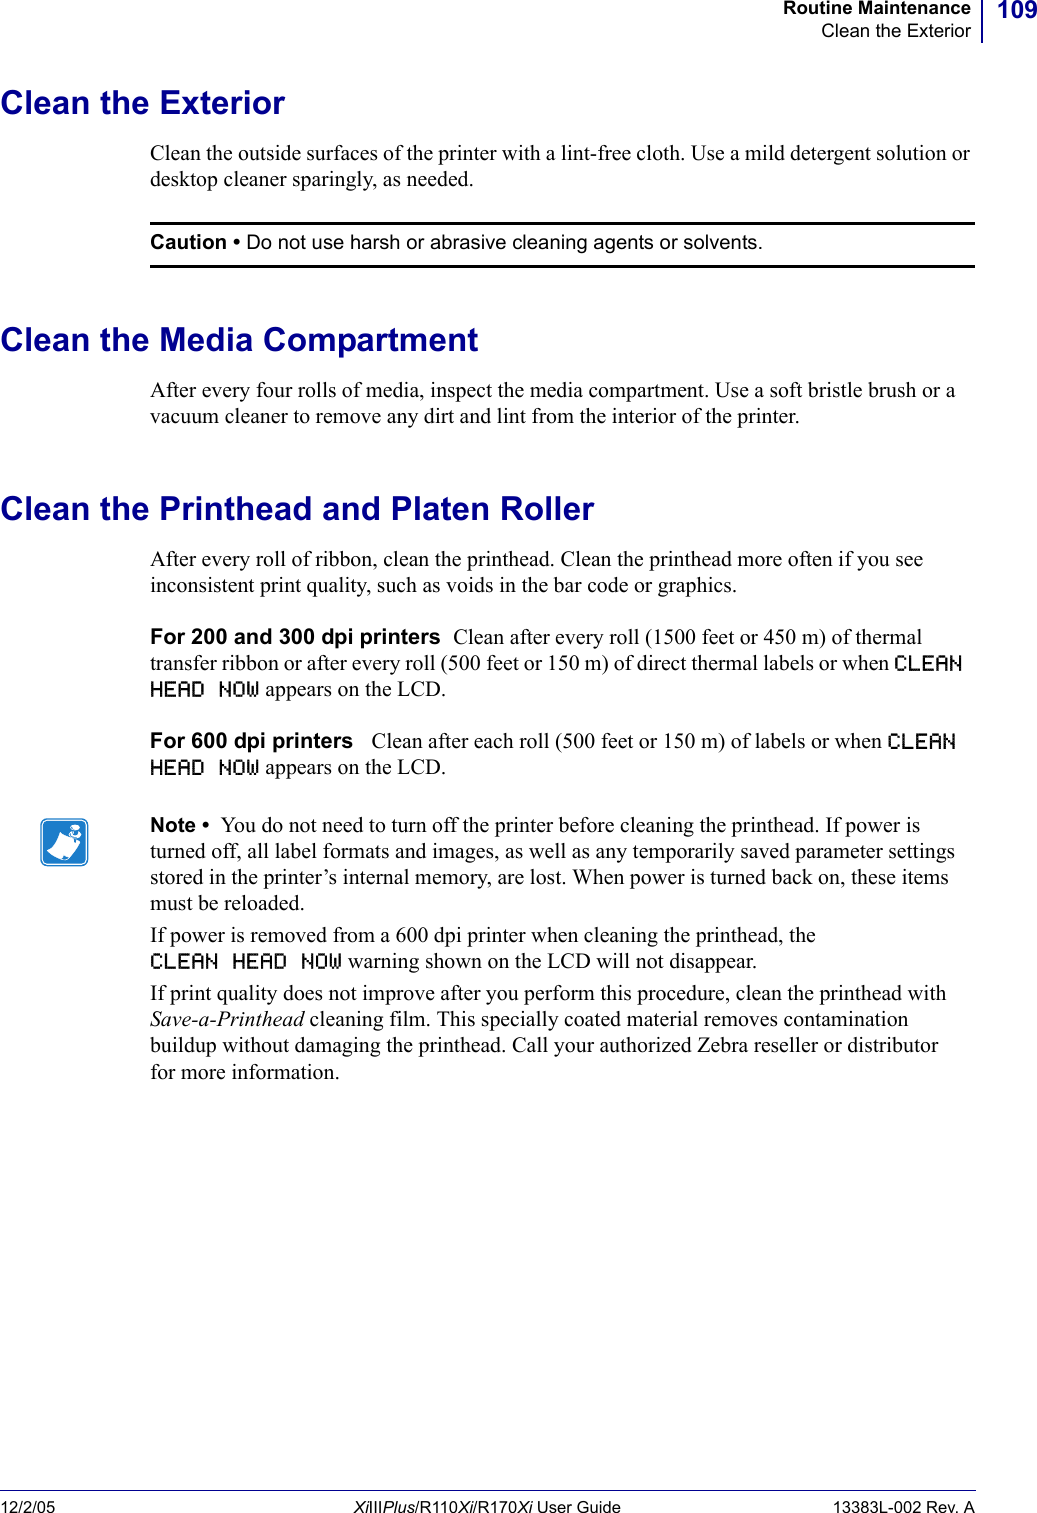 109Routine MaintenanceClean the Exterior12/2/05 XiIIIPlus/R110Xi/R170Xi User Guide 13383L-002 Rev. AClean the ExteriorClean the outside surfaces of the printer with a lint-free cloth. Use a mild detergent solution or desktop cleaner sparingly, as needed.Clean the Media CompartmentAfter every four rolls of media, inspect the media compartment. Use a soft bristle brush or a vacuum cleaner to remove any dirt and lint from the interior of the printer.Clean the Printhead and Platen RollerAfter every roll of ribbon, clean the printhead. Clean the printhead more often if you see inconsistent print quality, such as voids in the bar code or graphics.For 200 and 300 dpi printers  Clean after every roll (1500 feet or 450 m) of thermal transfer ribbon or after every roll (500 feet or 150 m) of direct thermal labels or when CLEAN HEAD NOW appears on the LCD.For 600 dpi printers   Clean after each roll (500 feet or 150 m) of labels or when CLEAN HEAD NOW appears on the LCD.Caution • Do not use harsh or abrasive cleaning agents or solvents.Note •  You do not need to turn off the printer before cleaning the printhead. If power is turned off, all label formats and images, as well as any temporarily saved parameter settings stored in the printer’s internal memory, are lost. When power is turned back on, these items must be reloaded.If power is removed from a 600 dpi printer when cleaning the printhead, the CLEAN HEAD NOW warning shown on the LCD will not disappear.If print quality does not improve after you perform this procedure, clean the printhead with Save-a-Printhead cleaning film. This specially coated material removes contamination buildup without damaging the printhead. Call your authorized Zebra reseller or distributor for more information.